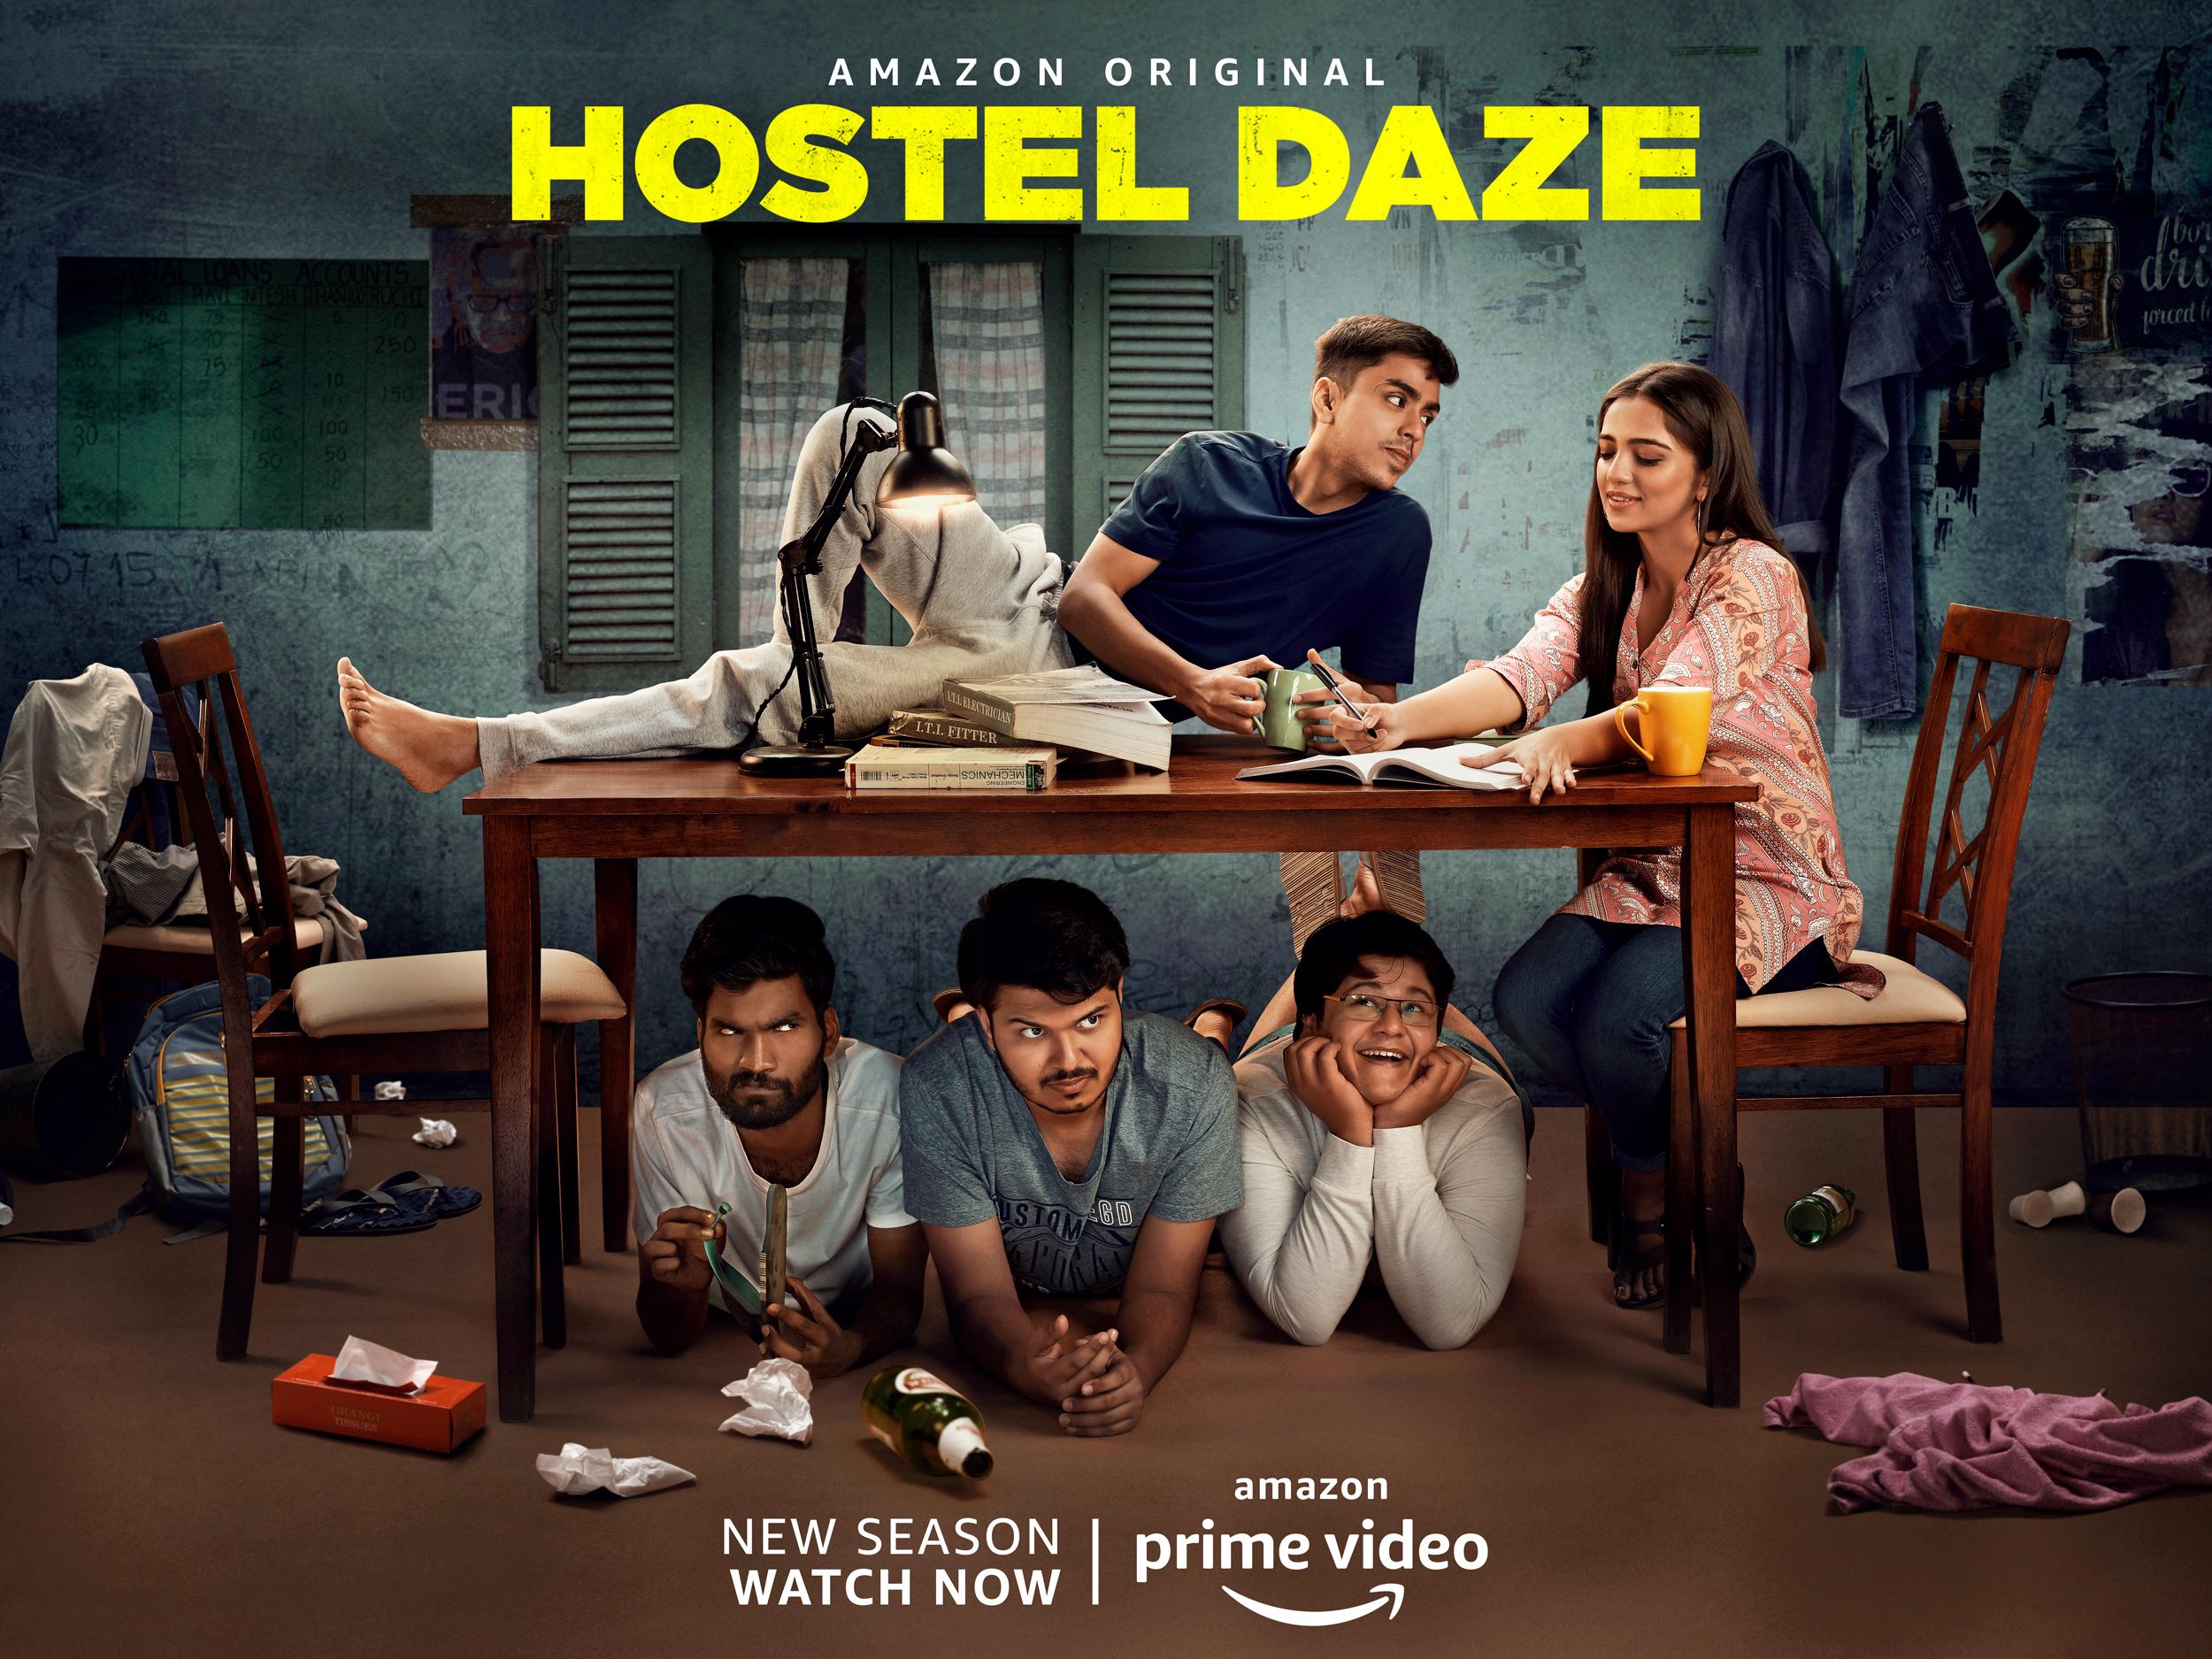 Hostel Daze - Prime Video (September 27)Prime Video welcomes back the uproarious gang from TVF's 